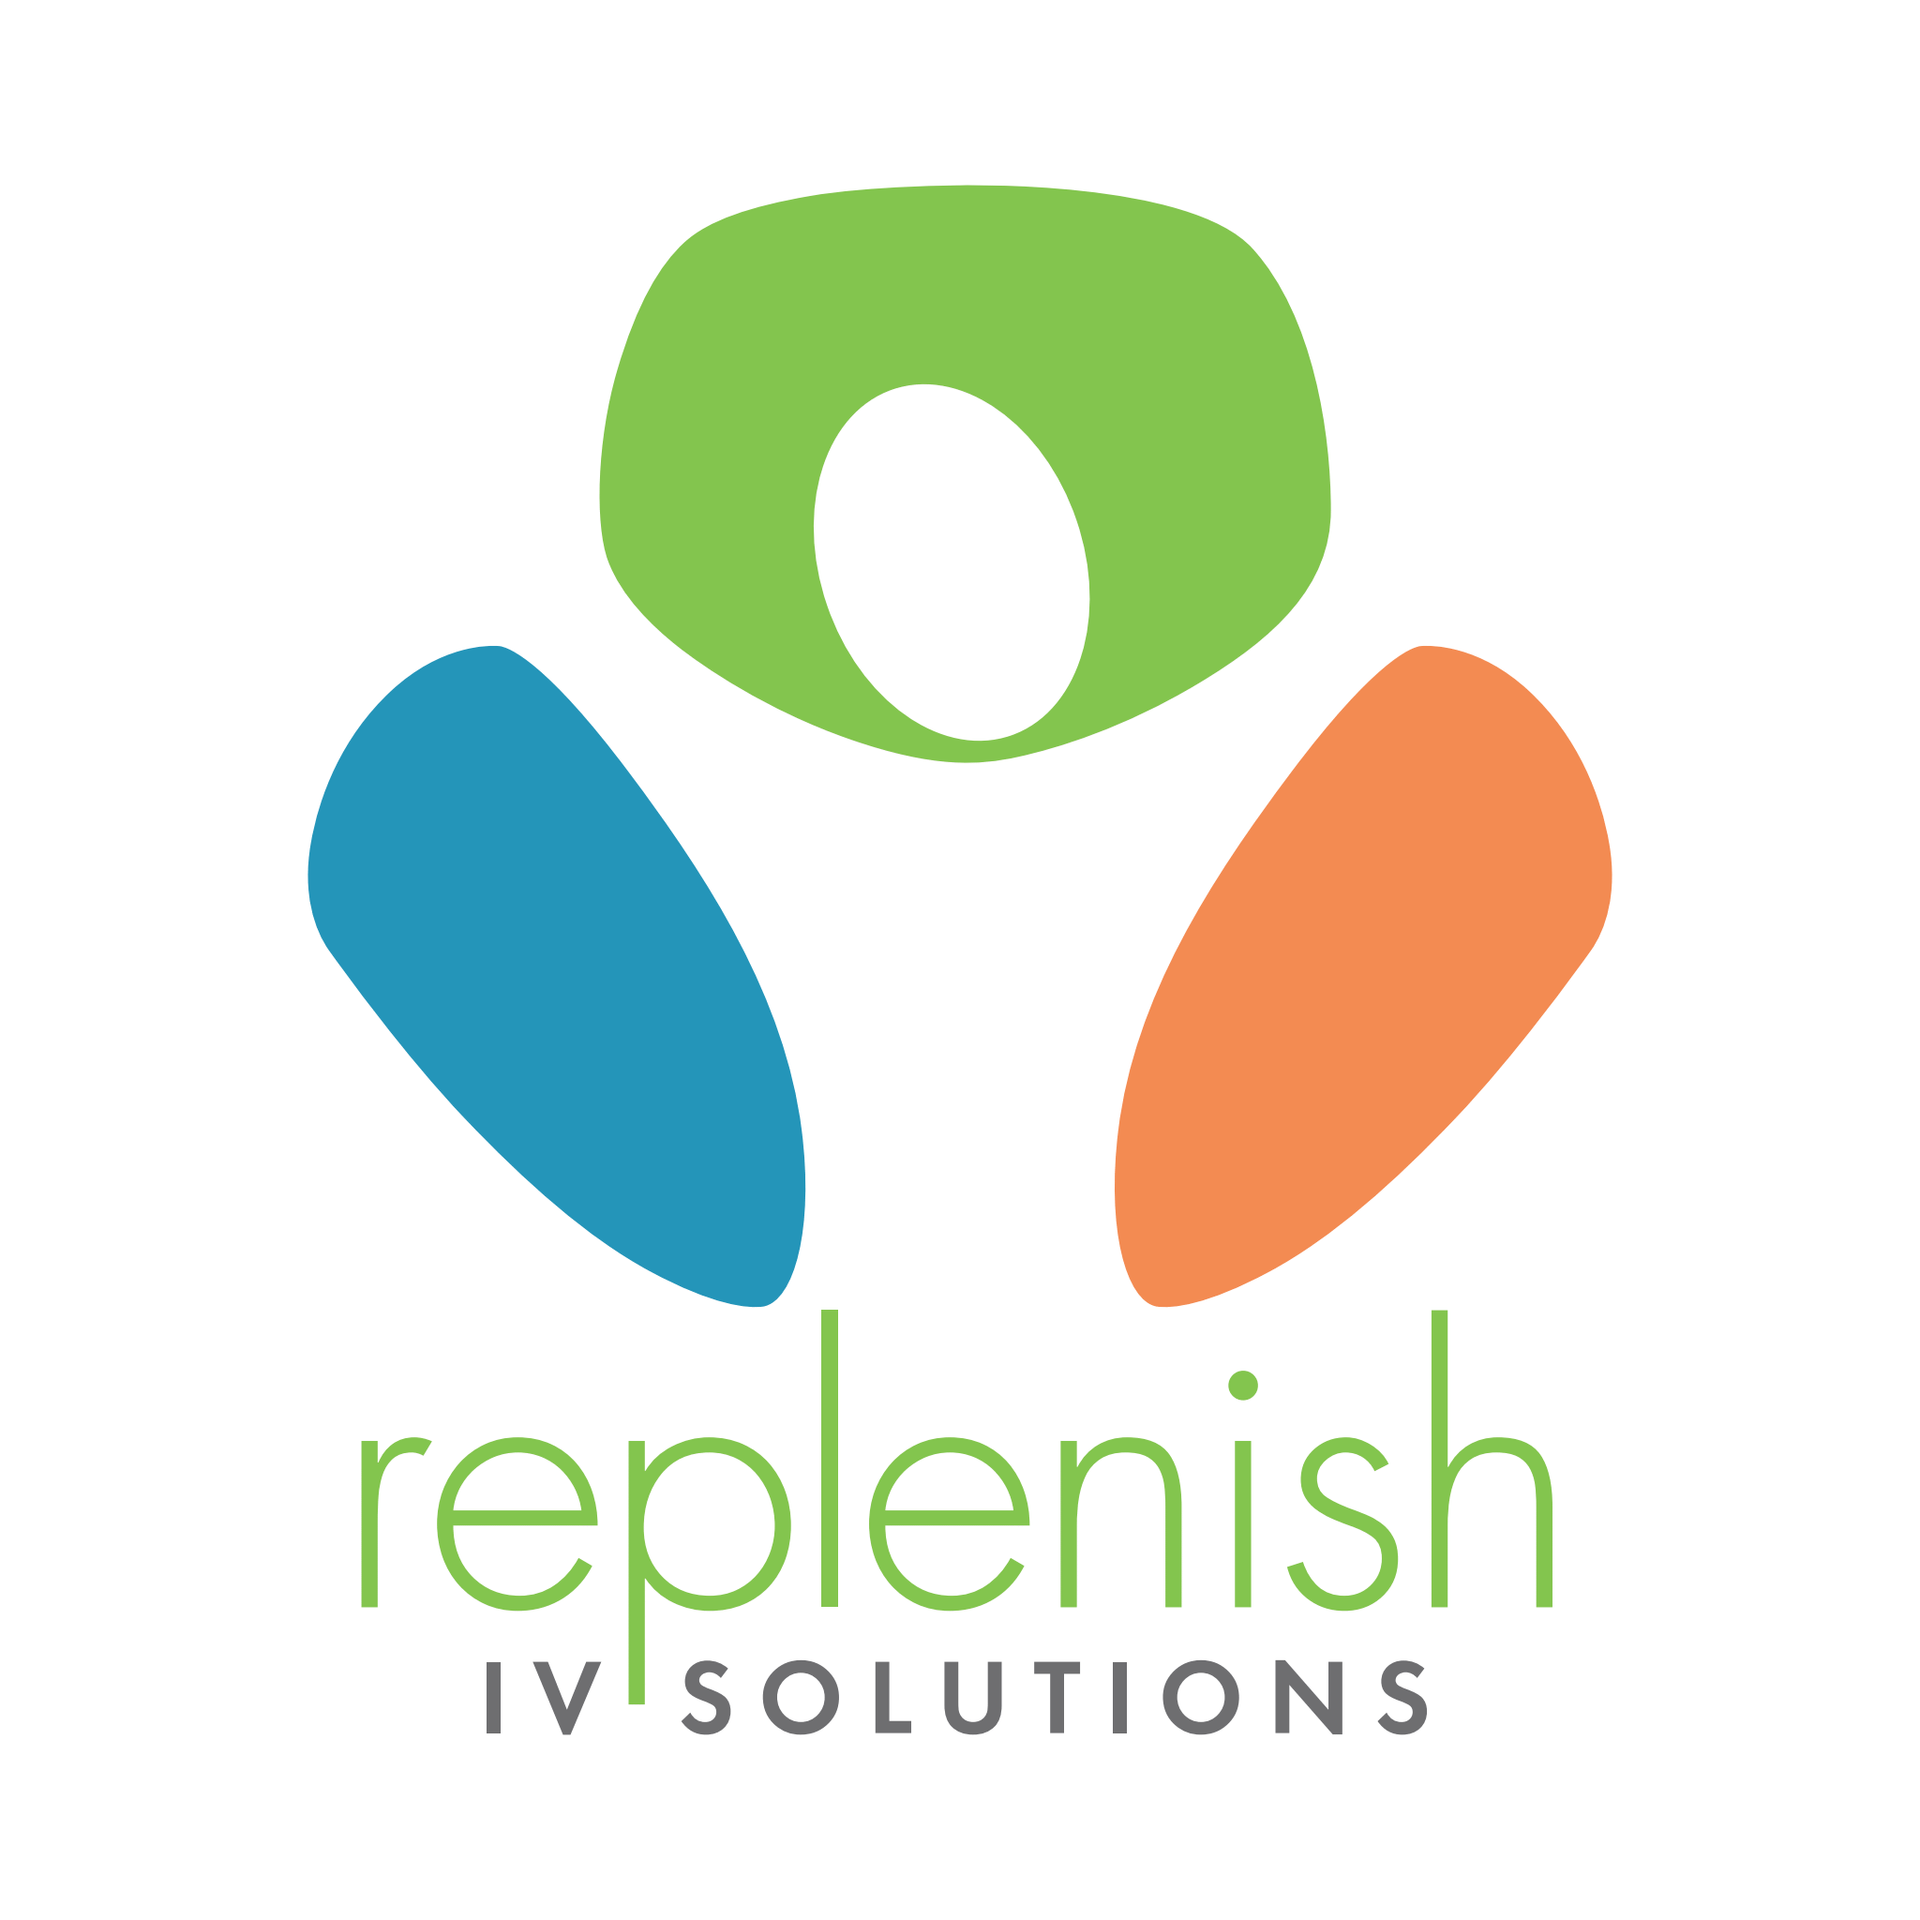 A colorful logo for replenish iv solutions